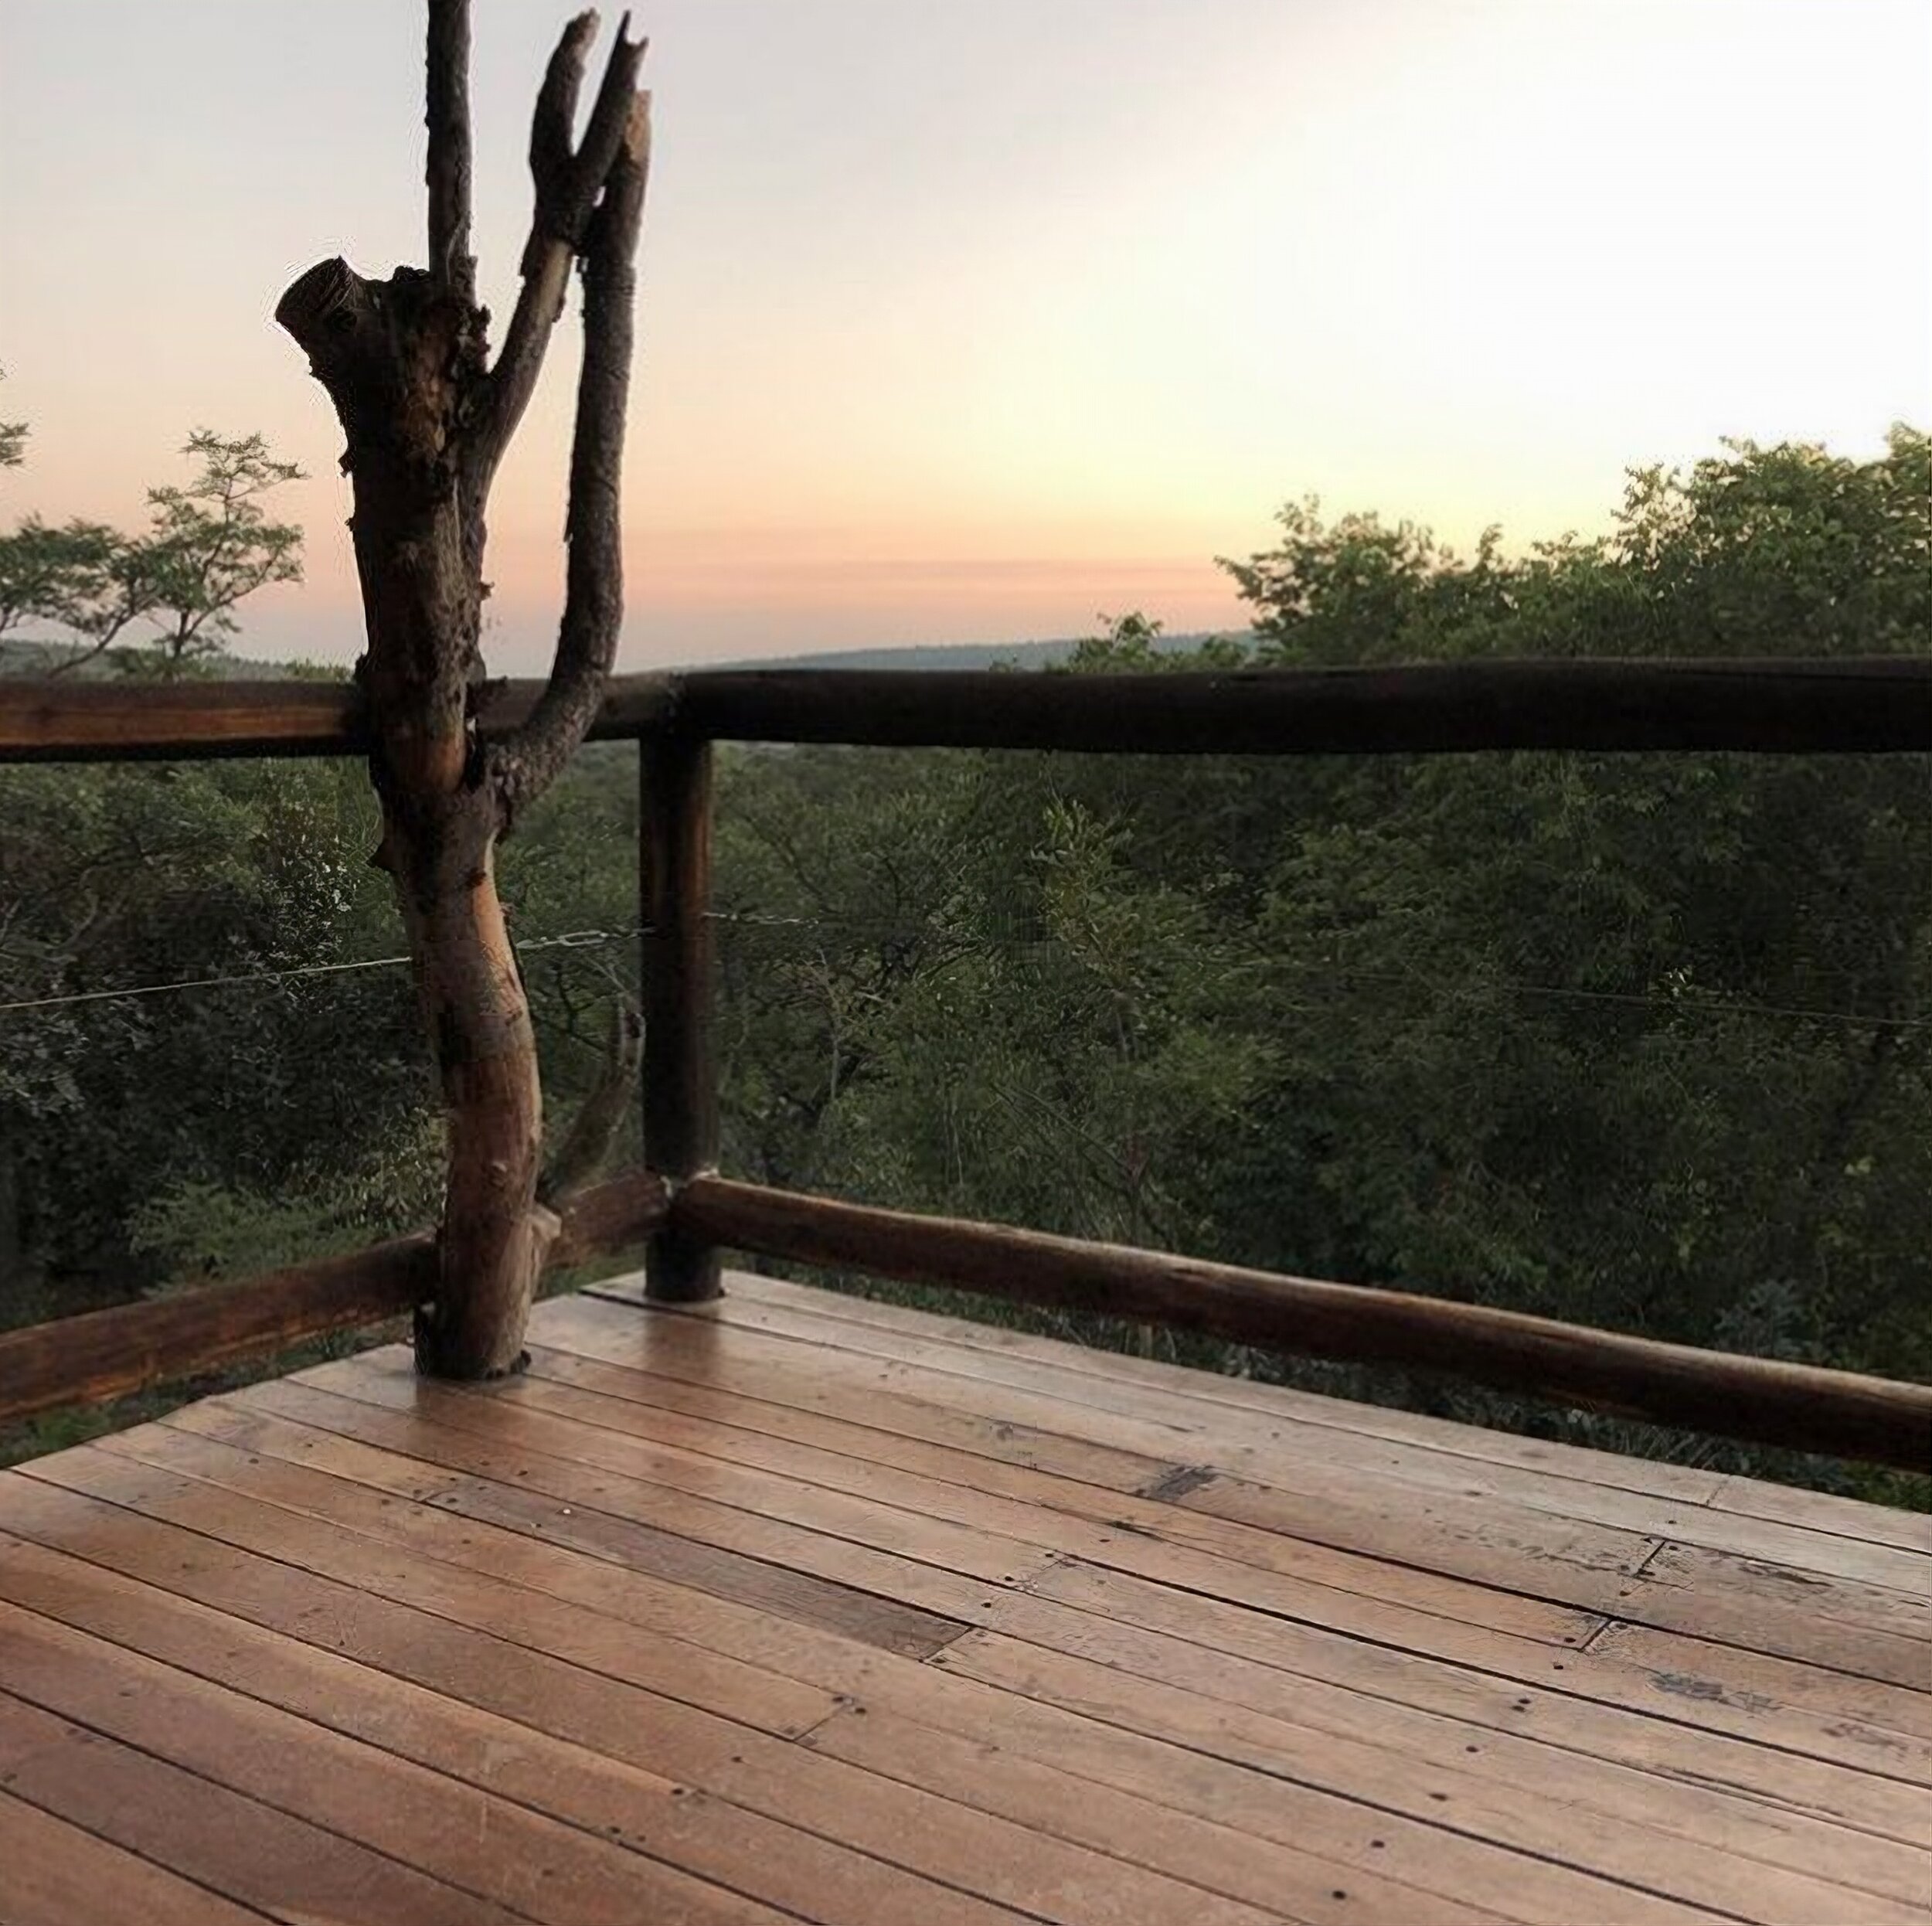 A peaceful sunrise, captured by @consciouscollab from their suite at Tshwene Lodge.